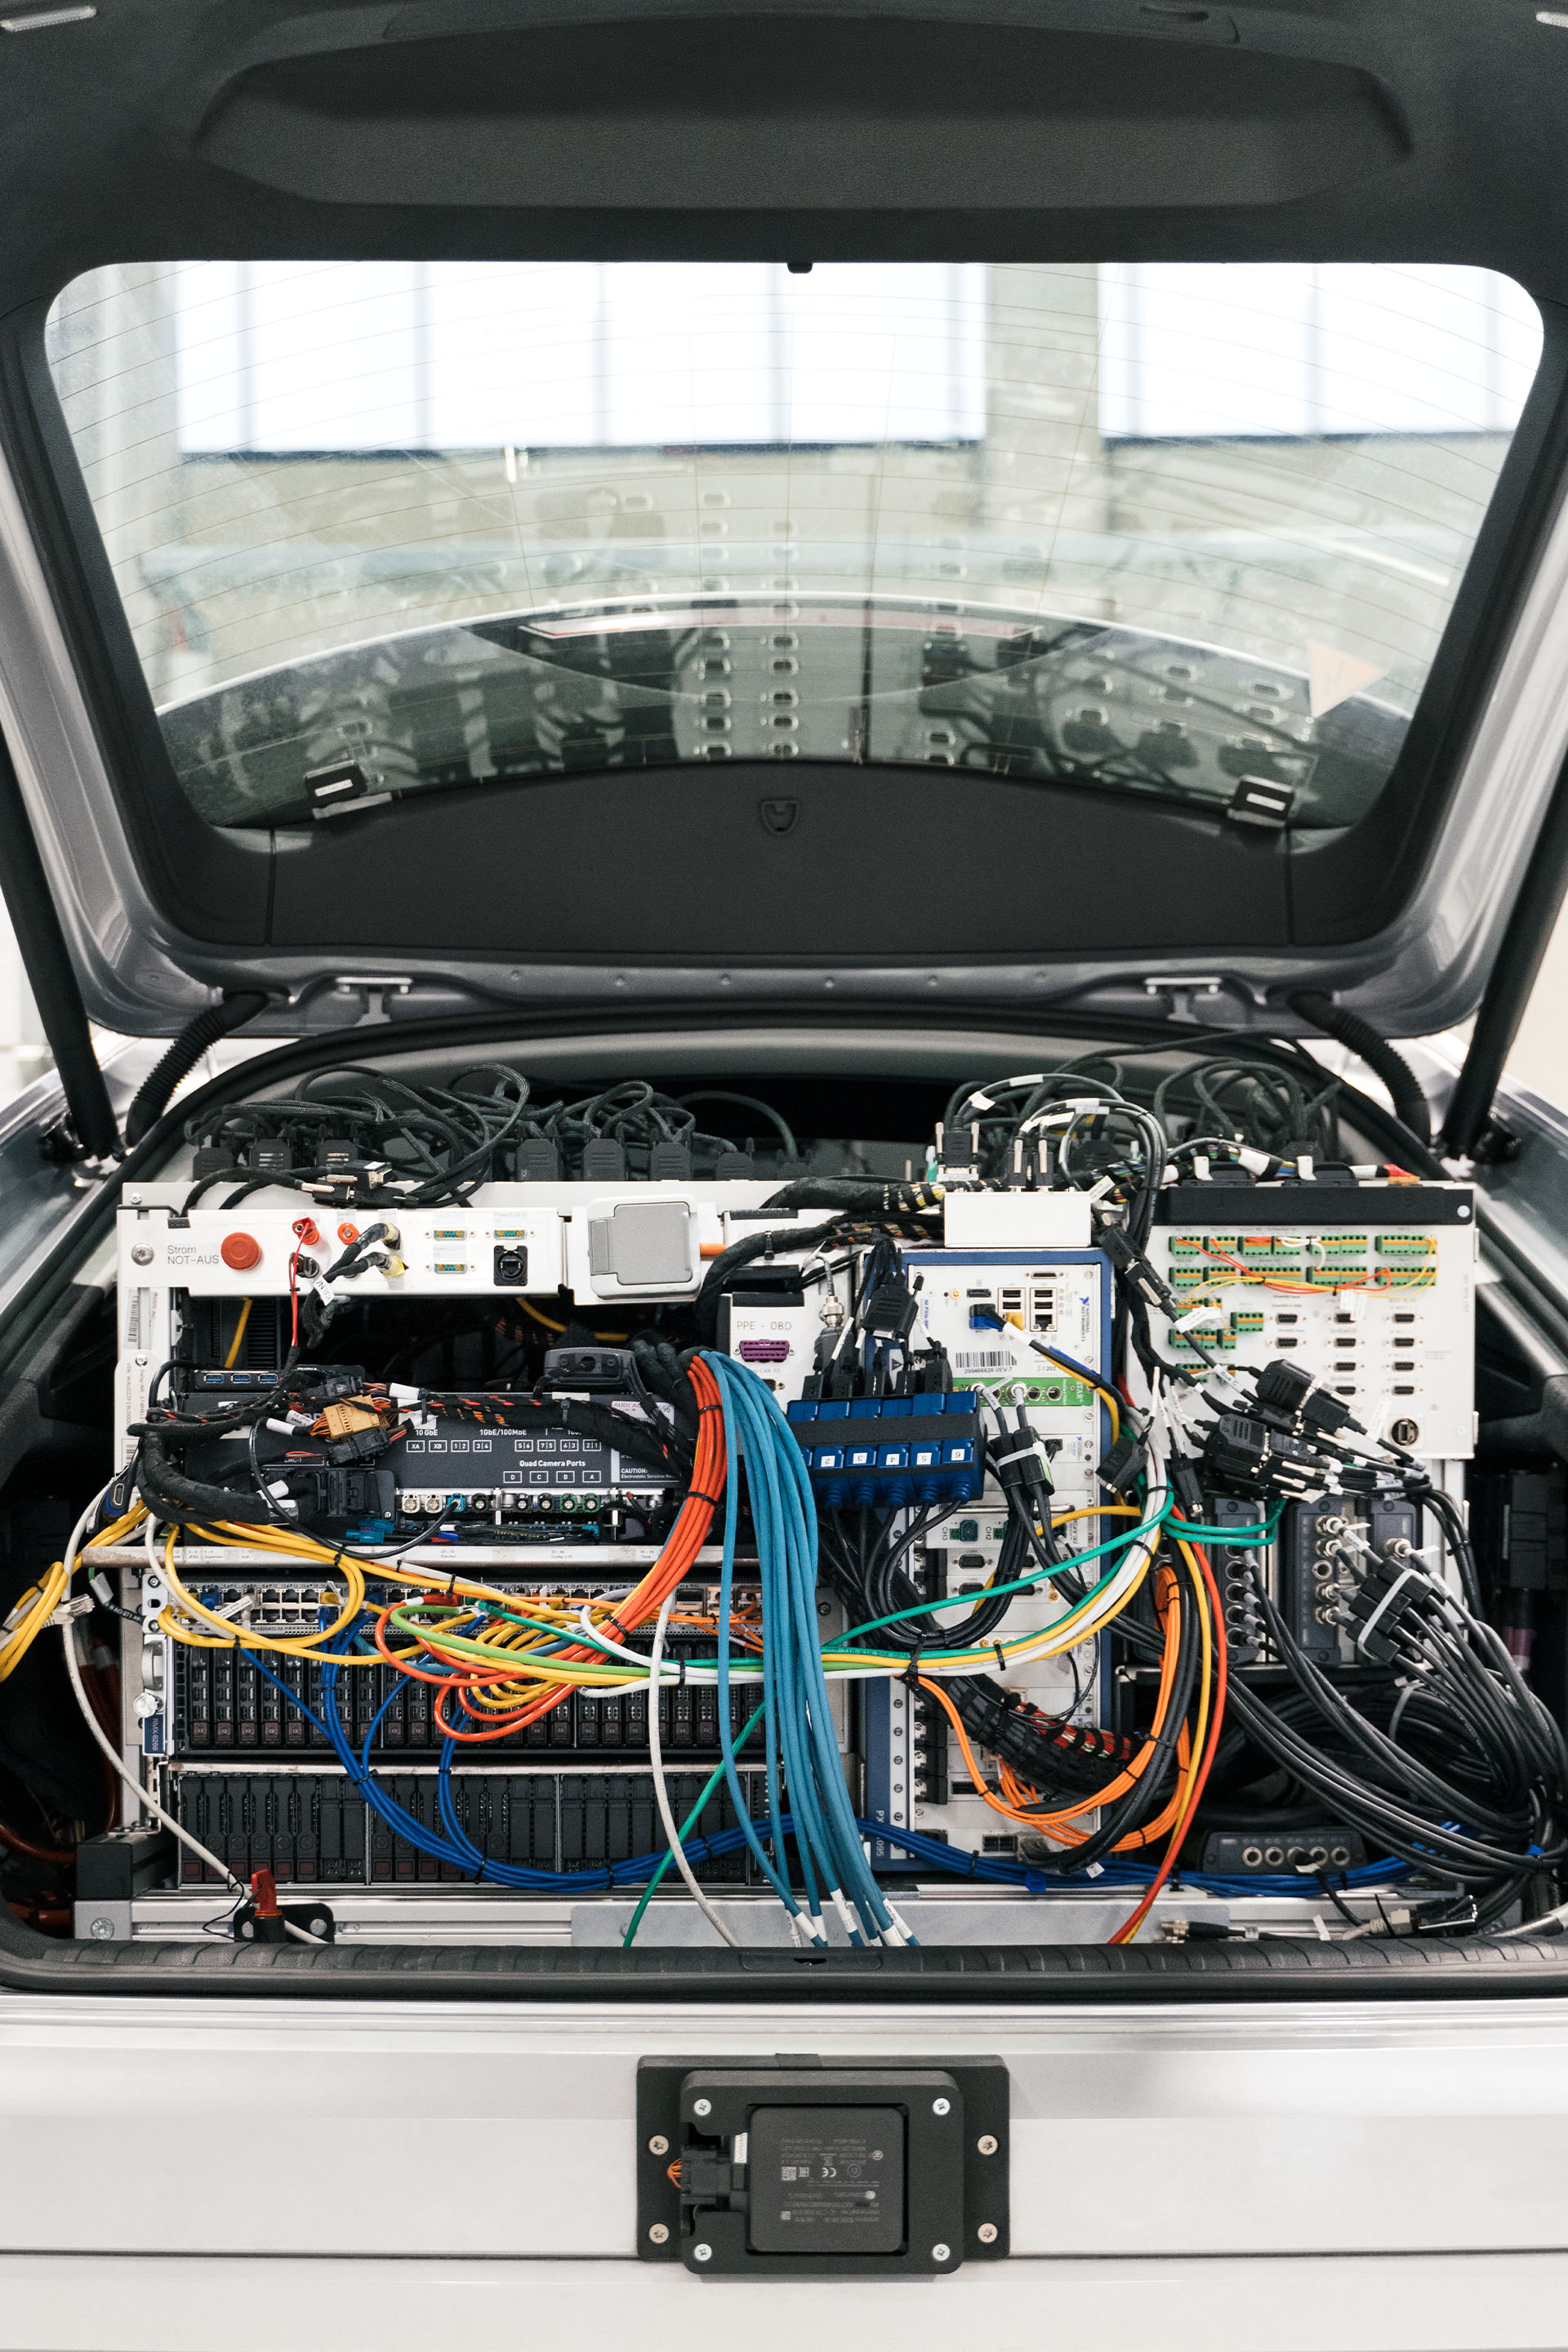 The technical equipment in the luggage compartment of the test vehicle